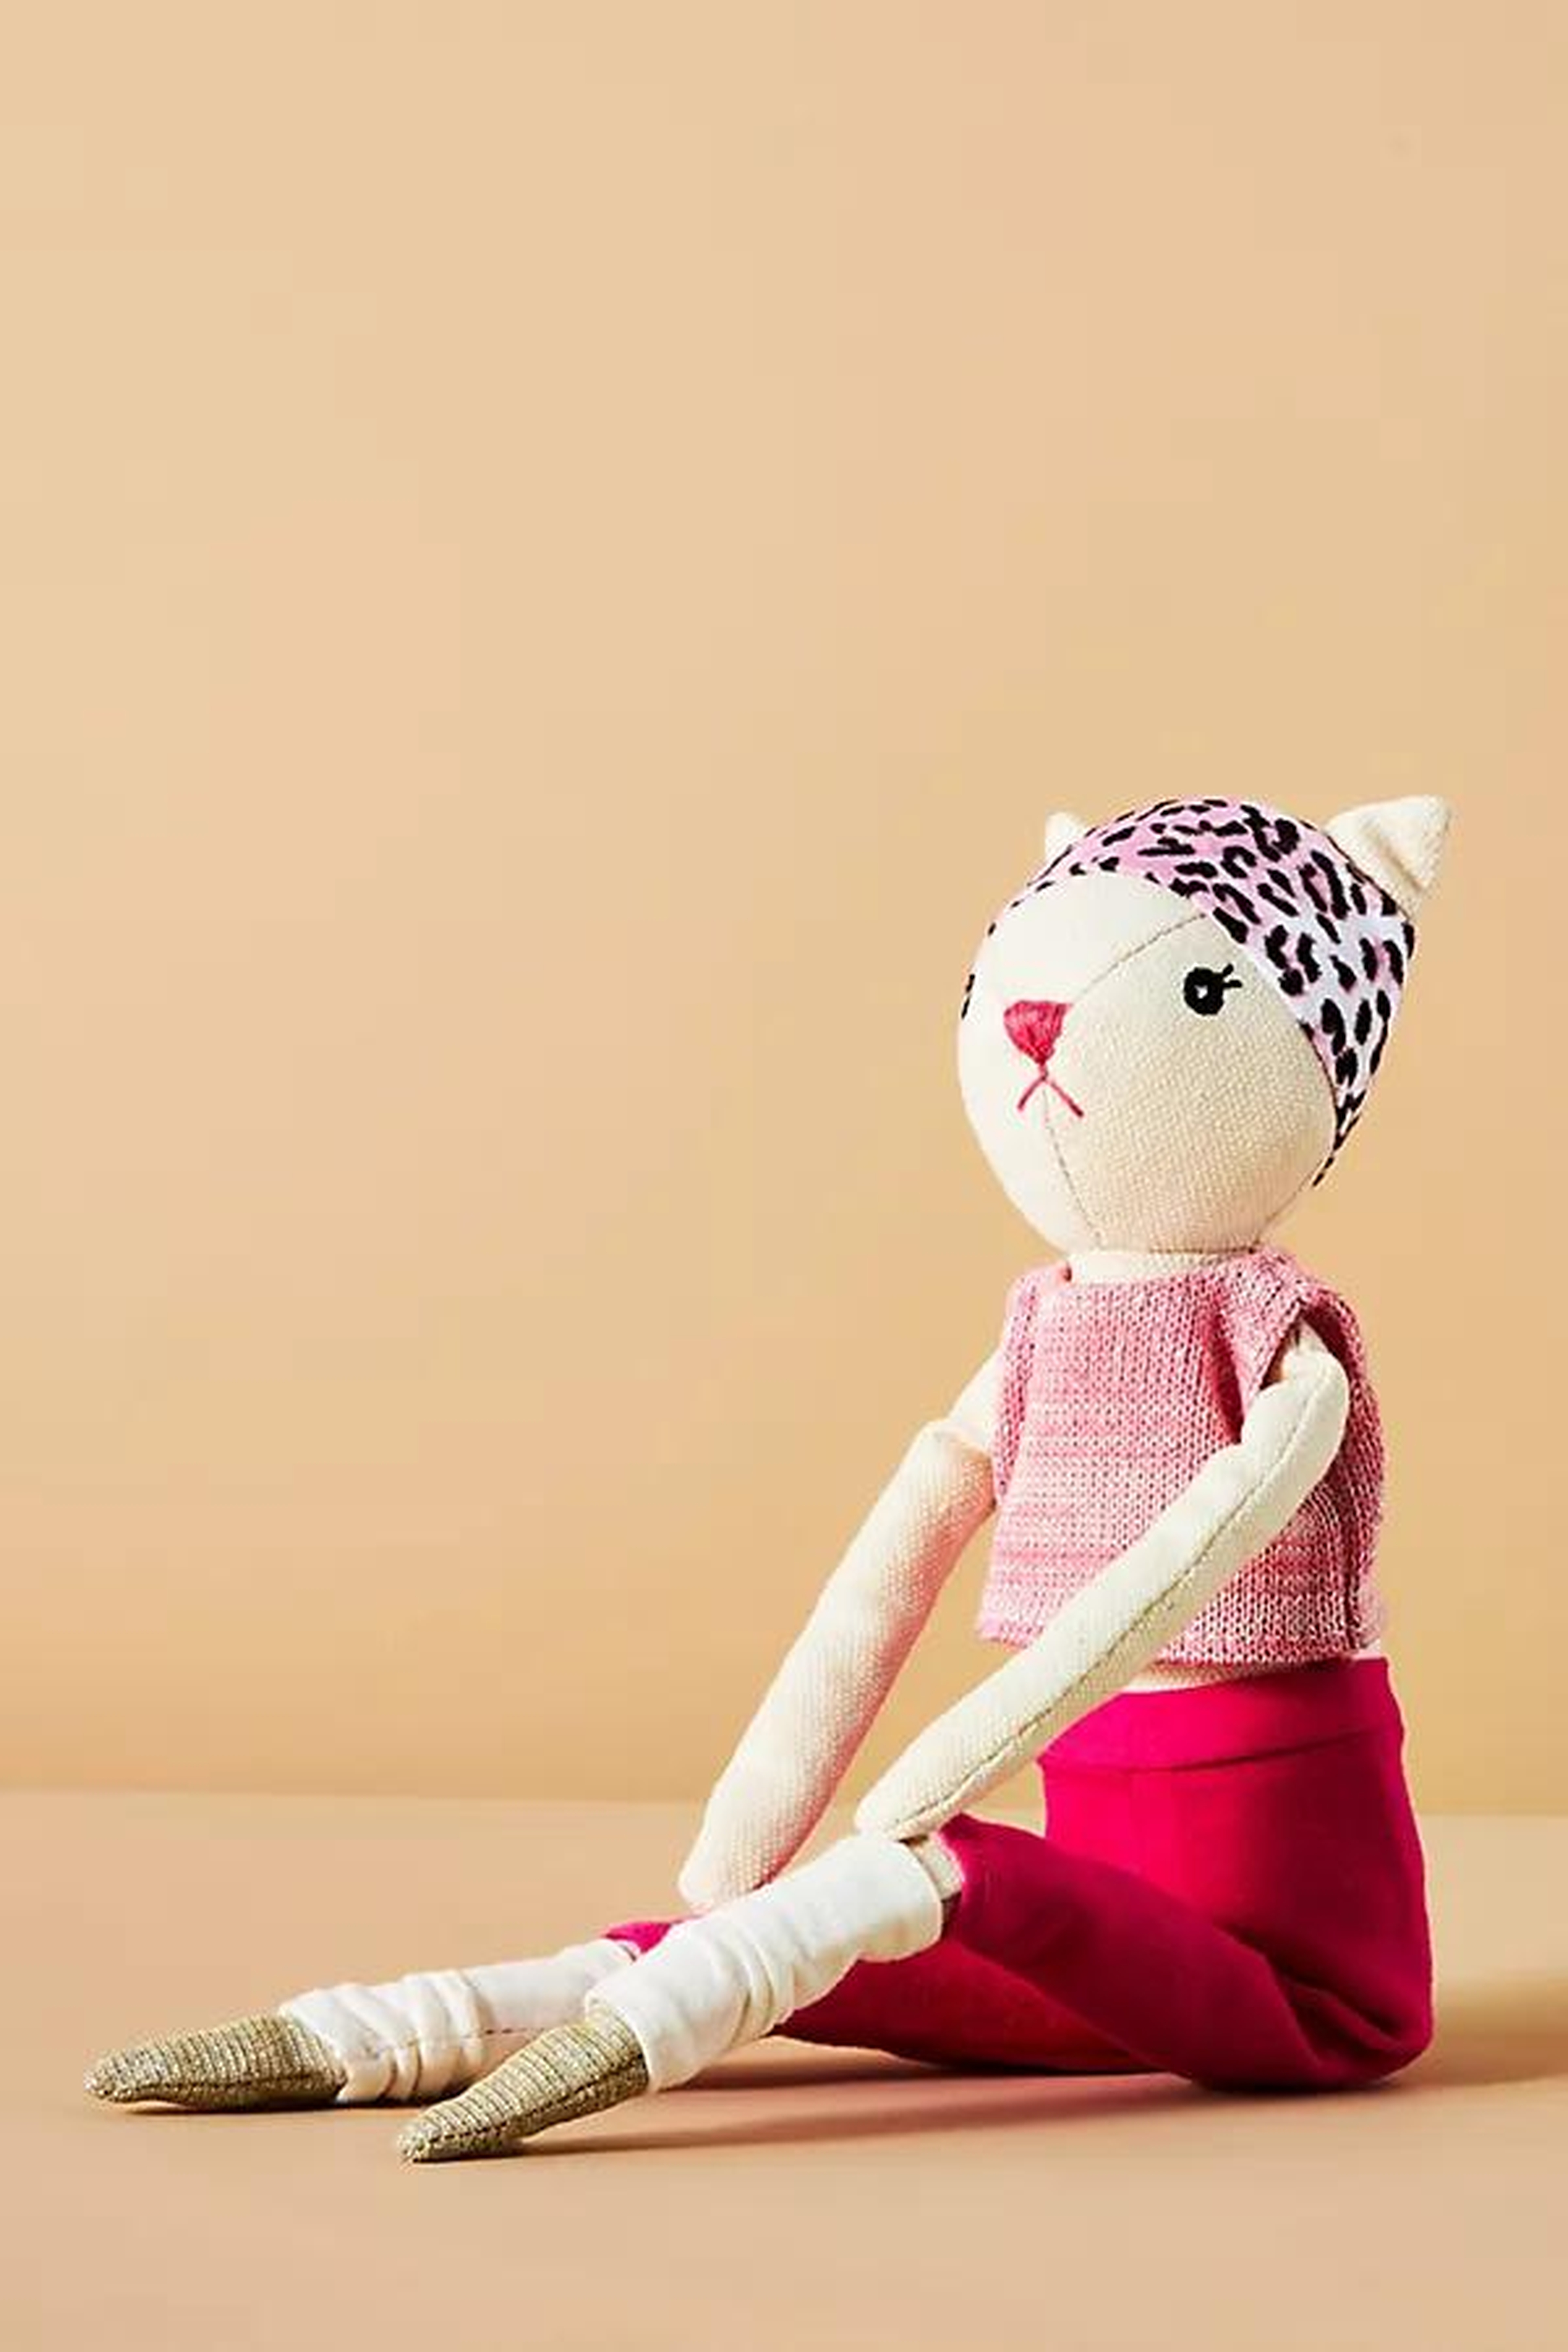 Activewear Stuffed Animal By Anthropologie in Pink - Anthropologie